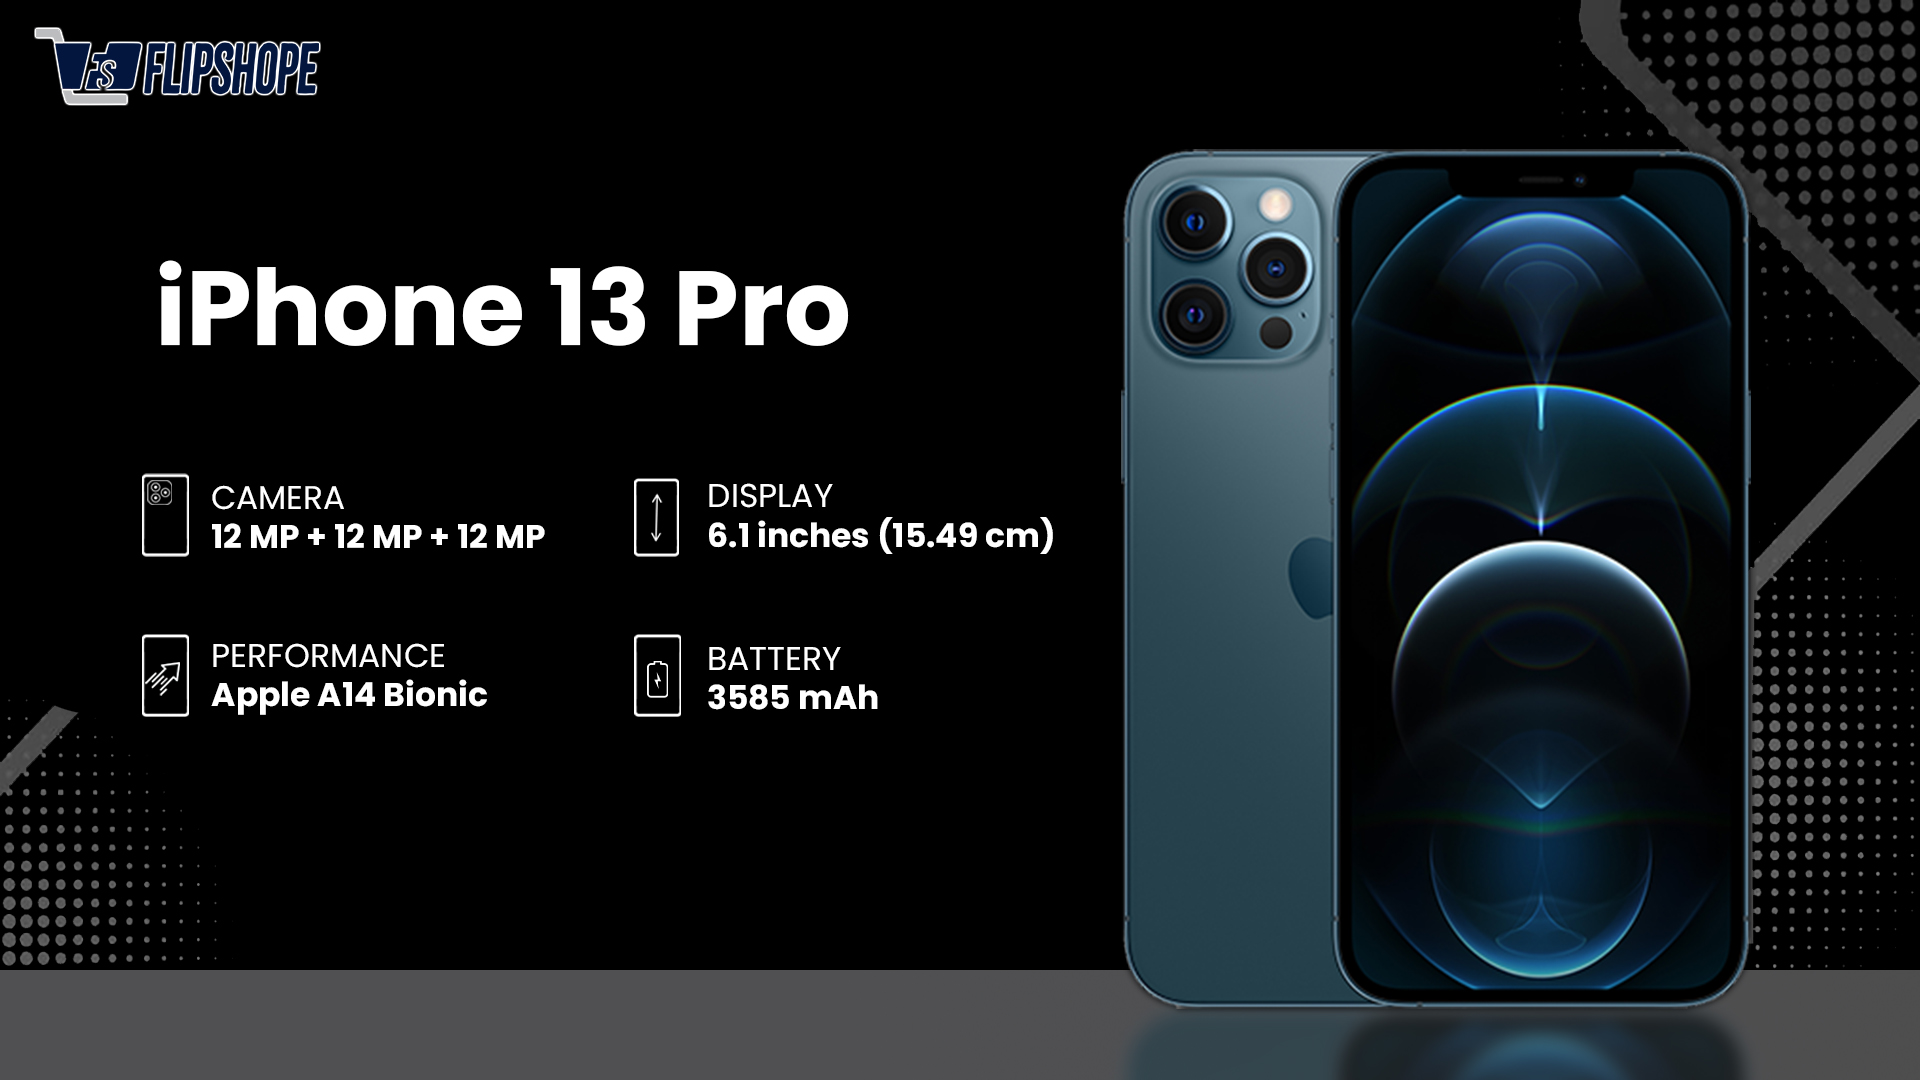 iphone 13 pro Specifications